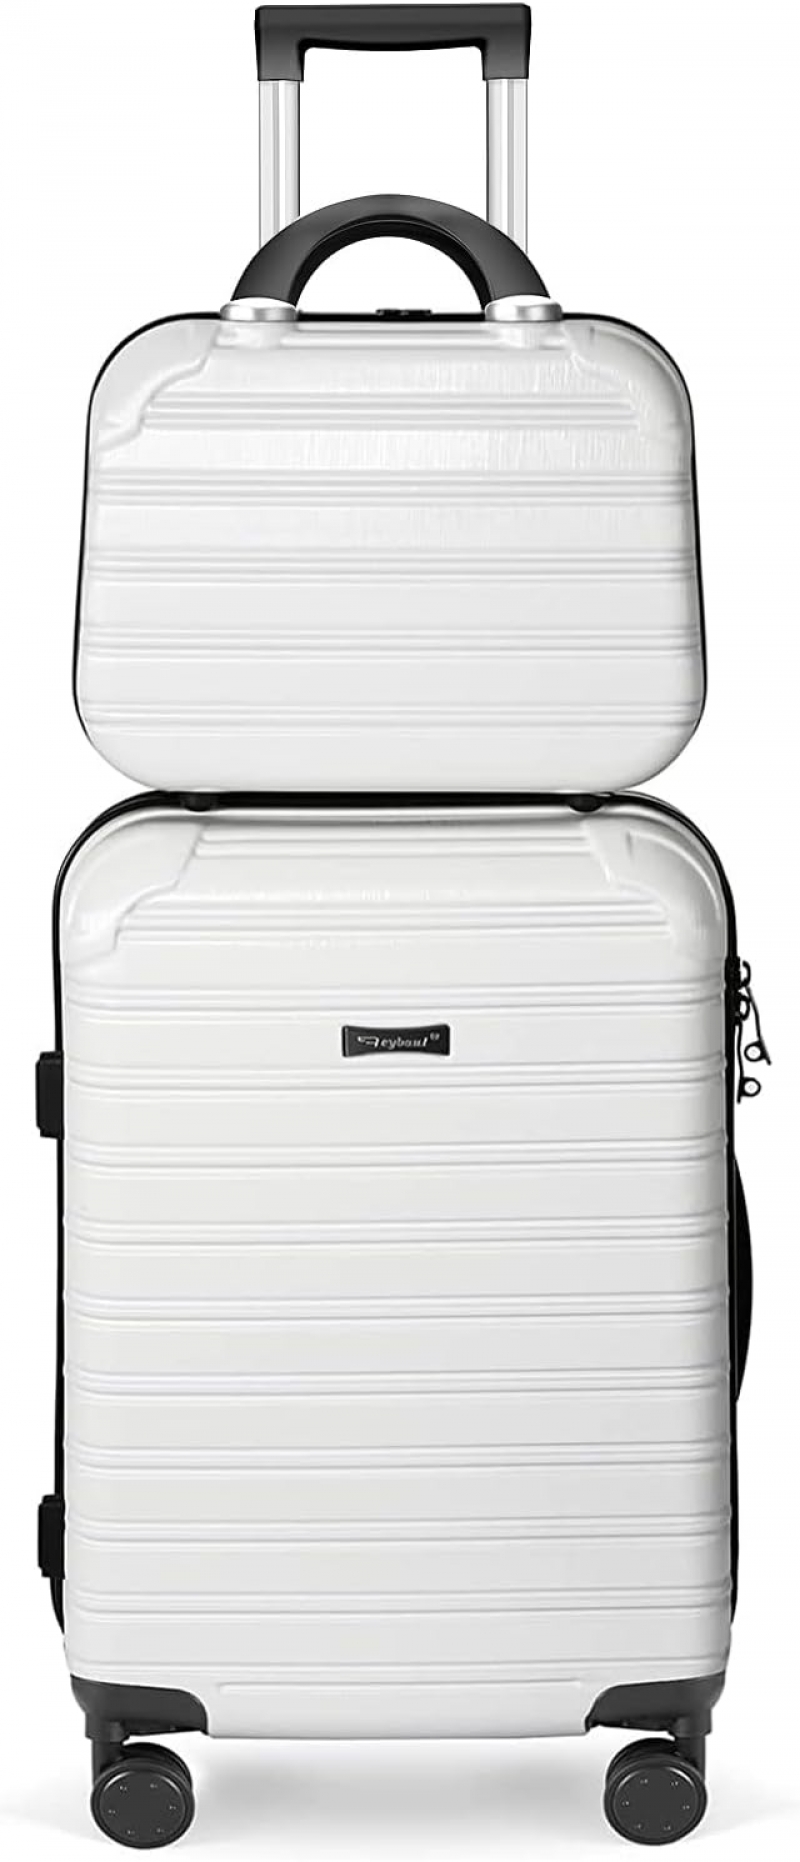 ihocon: Luggage Set 2PCS Suitcase PC+ABS Carry On Luggage with Spinner Wheels, White 2-Piece Set(14/20) (968) 行李箱套装 2件组